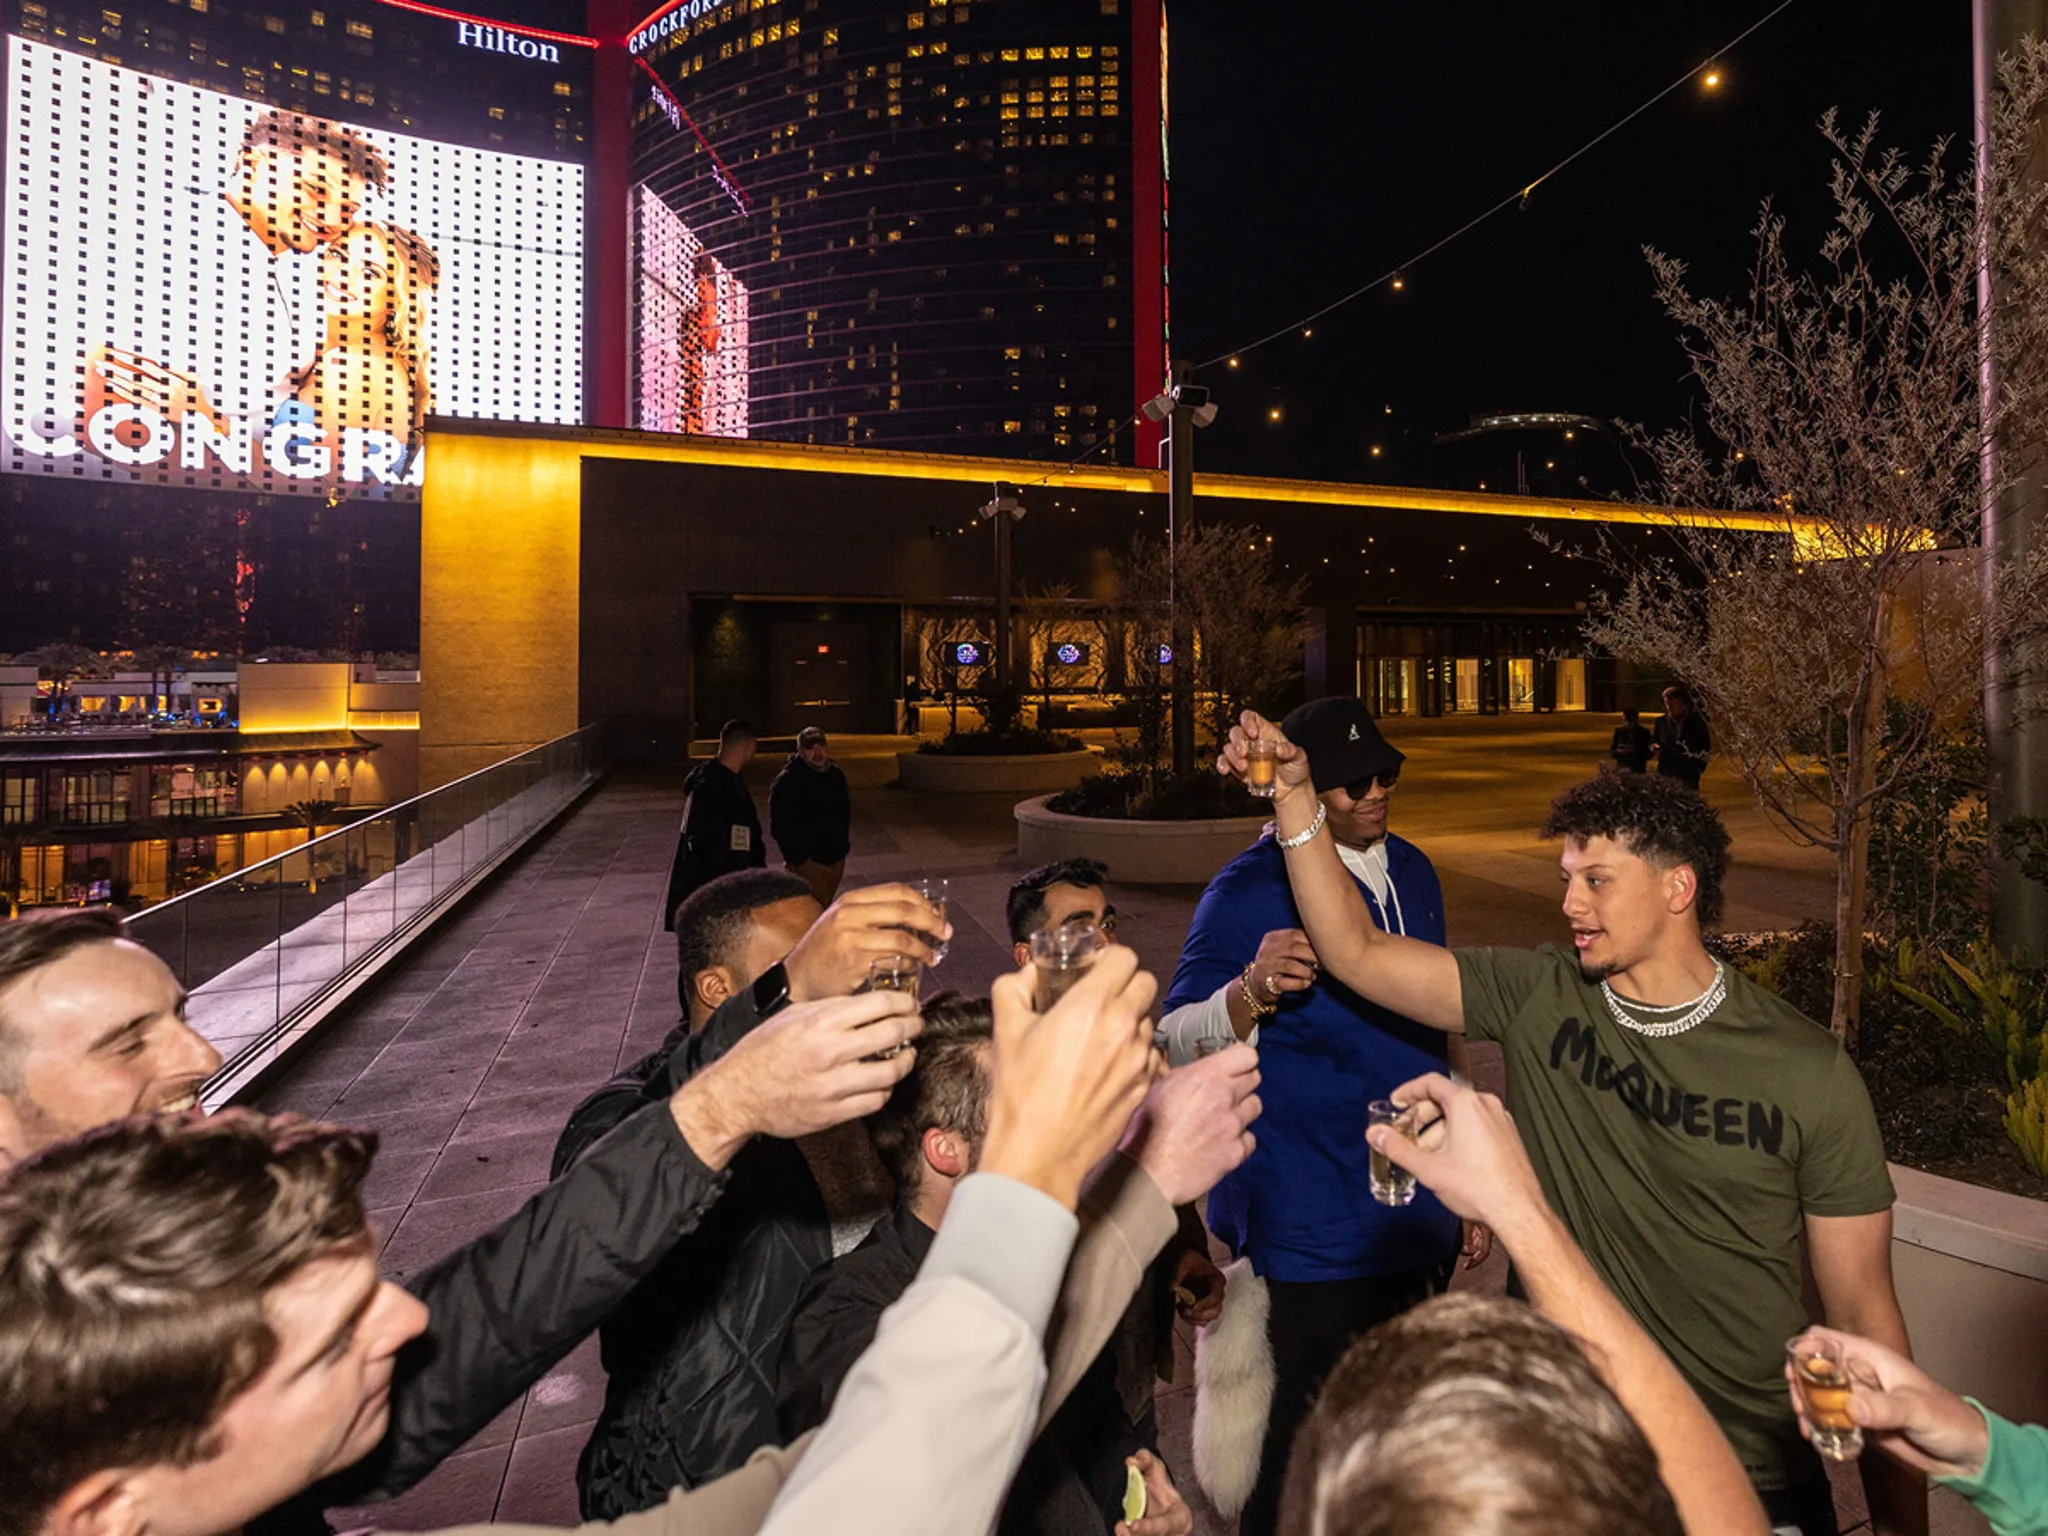 Patrick Mahomes Party in Style in Las vegas With a Fortune on Tequila and Wagyu Cheesesteak bites